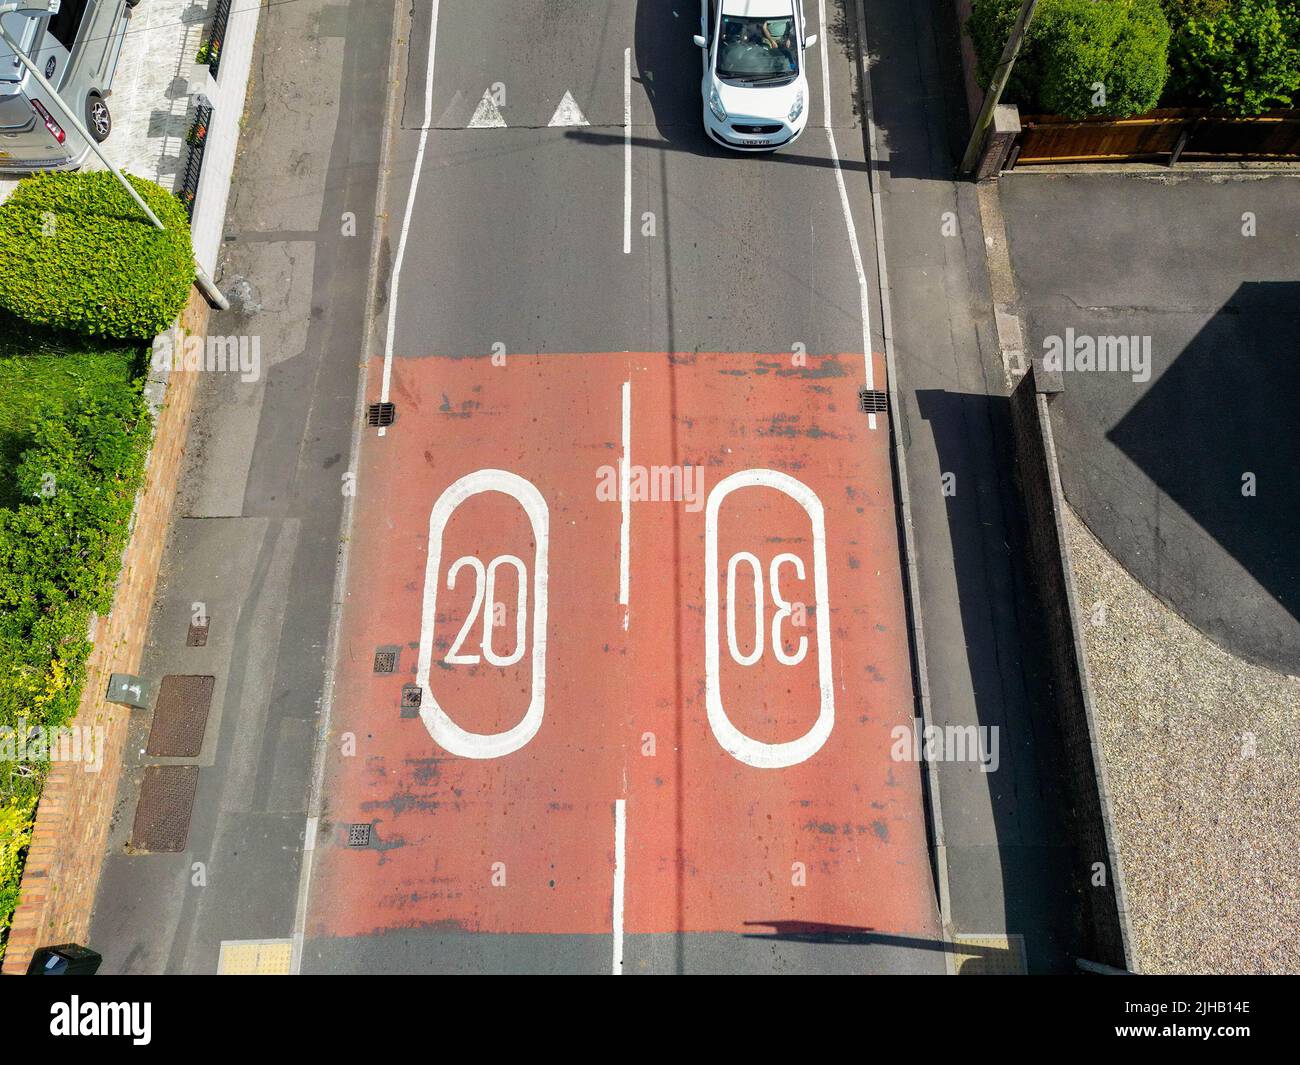 Pontypridd, Wales - July 2022: Aerial view of road markings showing 20 mph and 30 mph speed limits on a country road near a residential area. Stock Photo